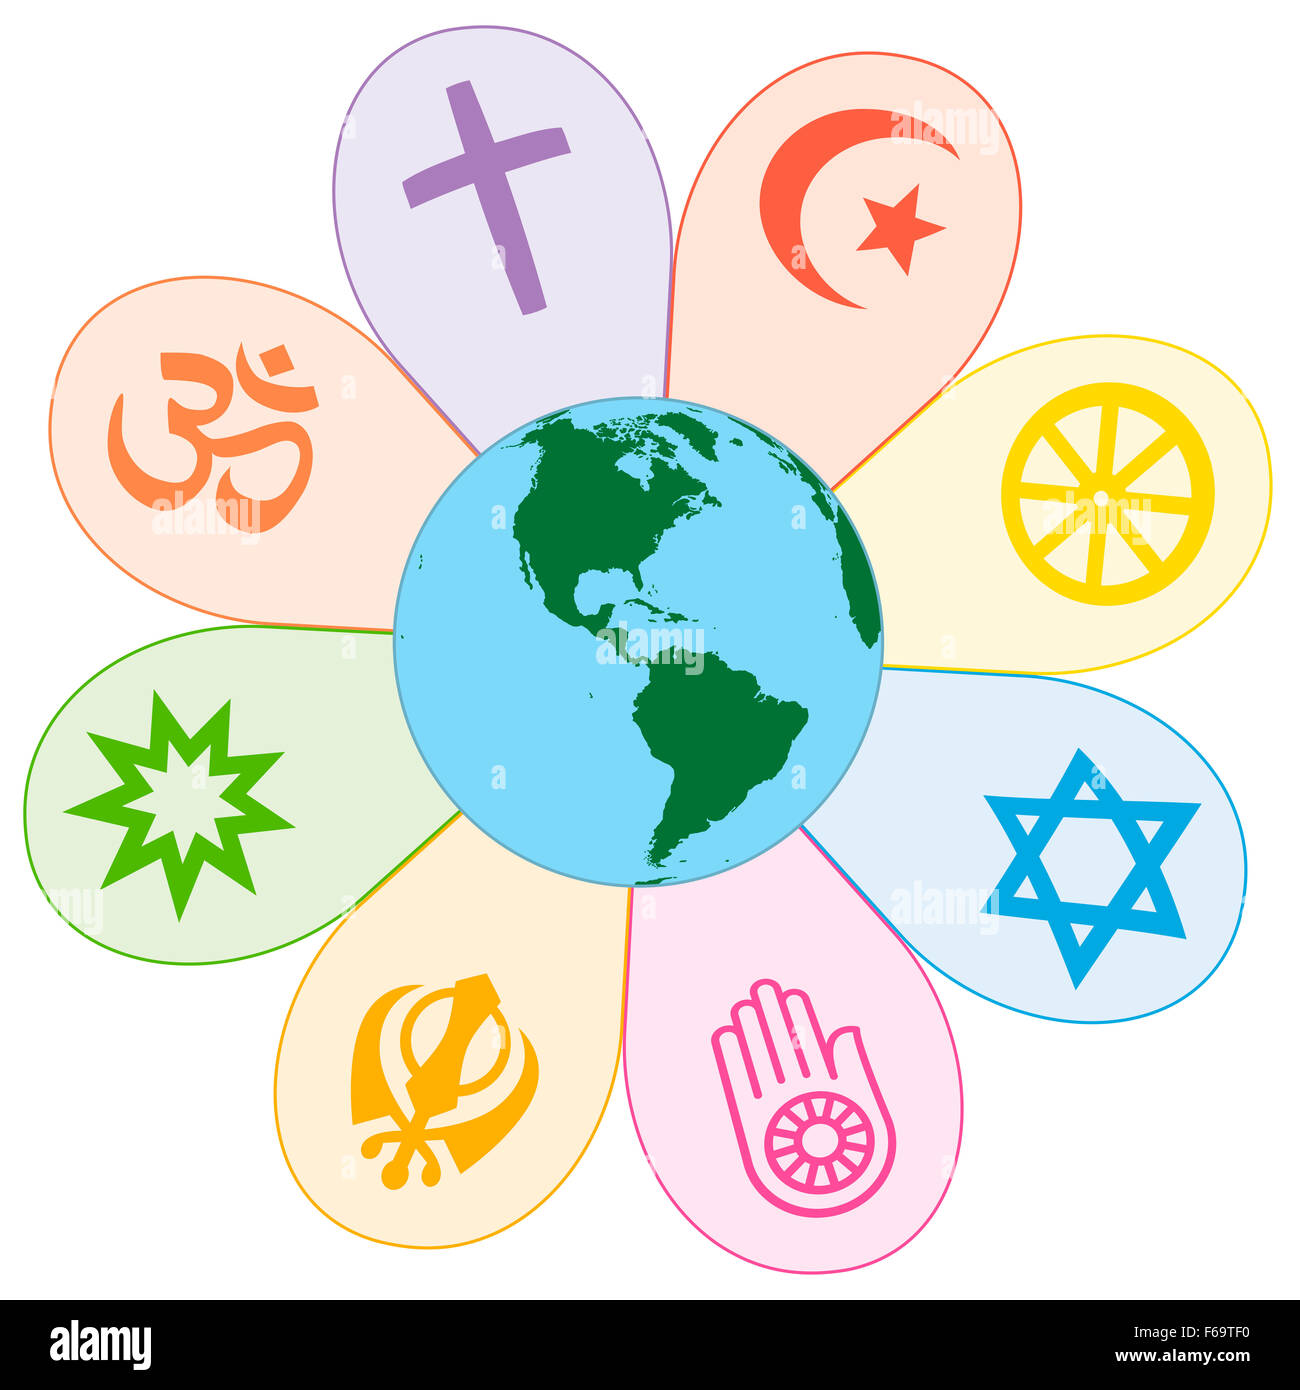 World religions united on a colorful flower with planet earth in center. Illustration on white background. Stock Photo